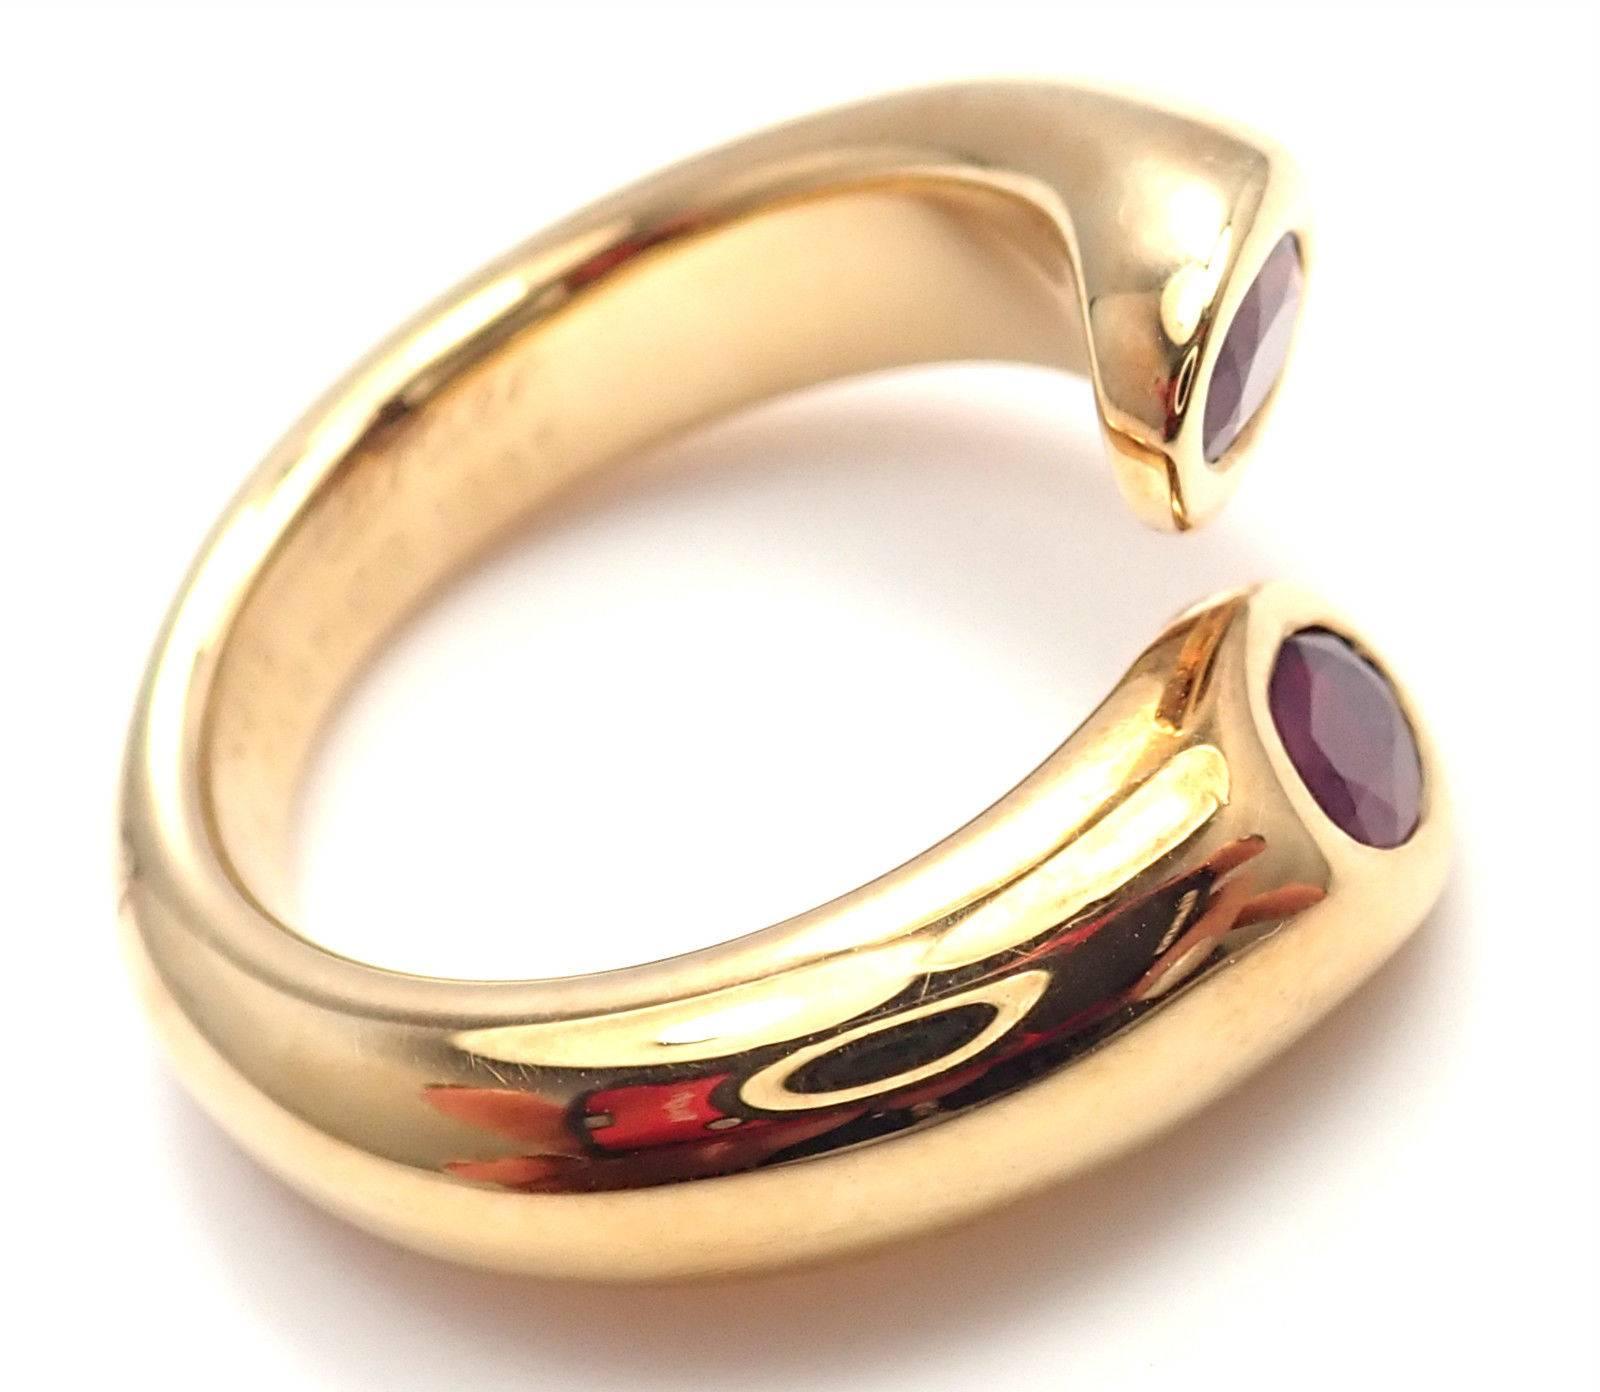 18k Yellow Gold Ellipse Deux Tetes Croisees Bypass Ruby Band Ring by Cartier.
With 2 oval cut rubies, approx 1.20ct
Metal: 18k Yellow Gold
Band Width: 9mm
Weight: 11.4 grams
Size:	European 52, US 6
Hallmarks: Cartier 750 52 D14619 1995
YOUR PRICE: